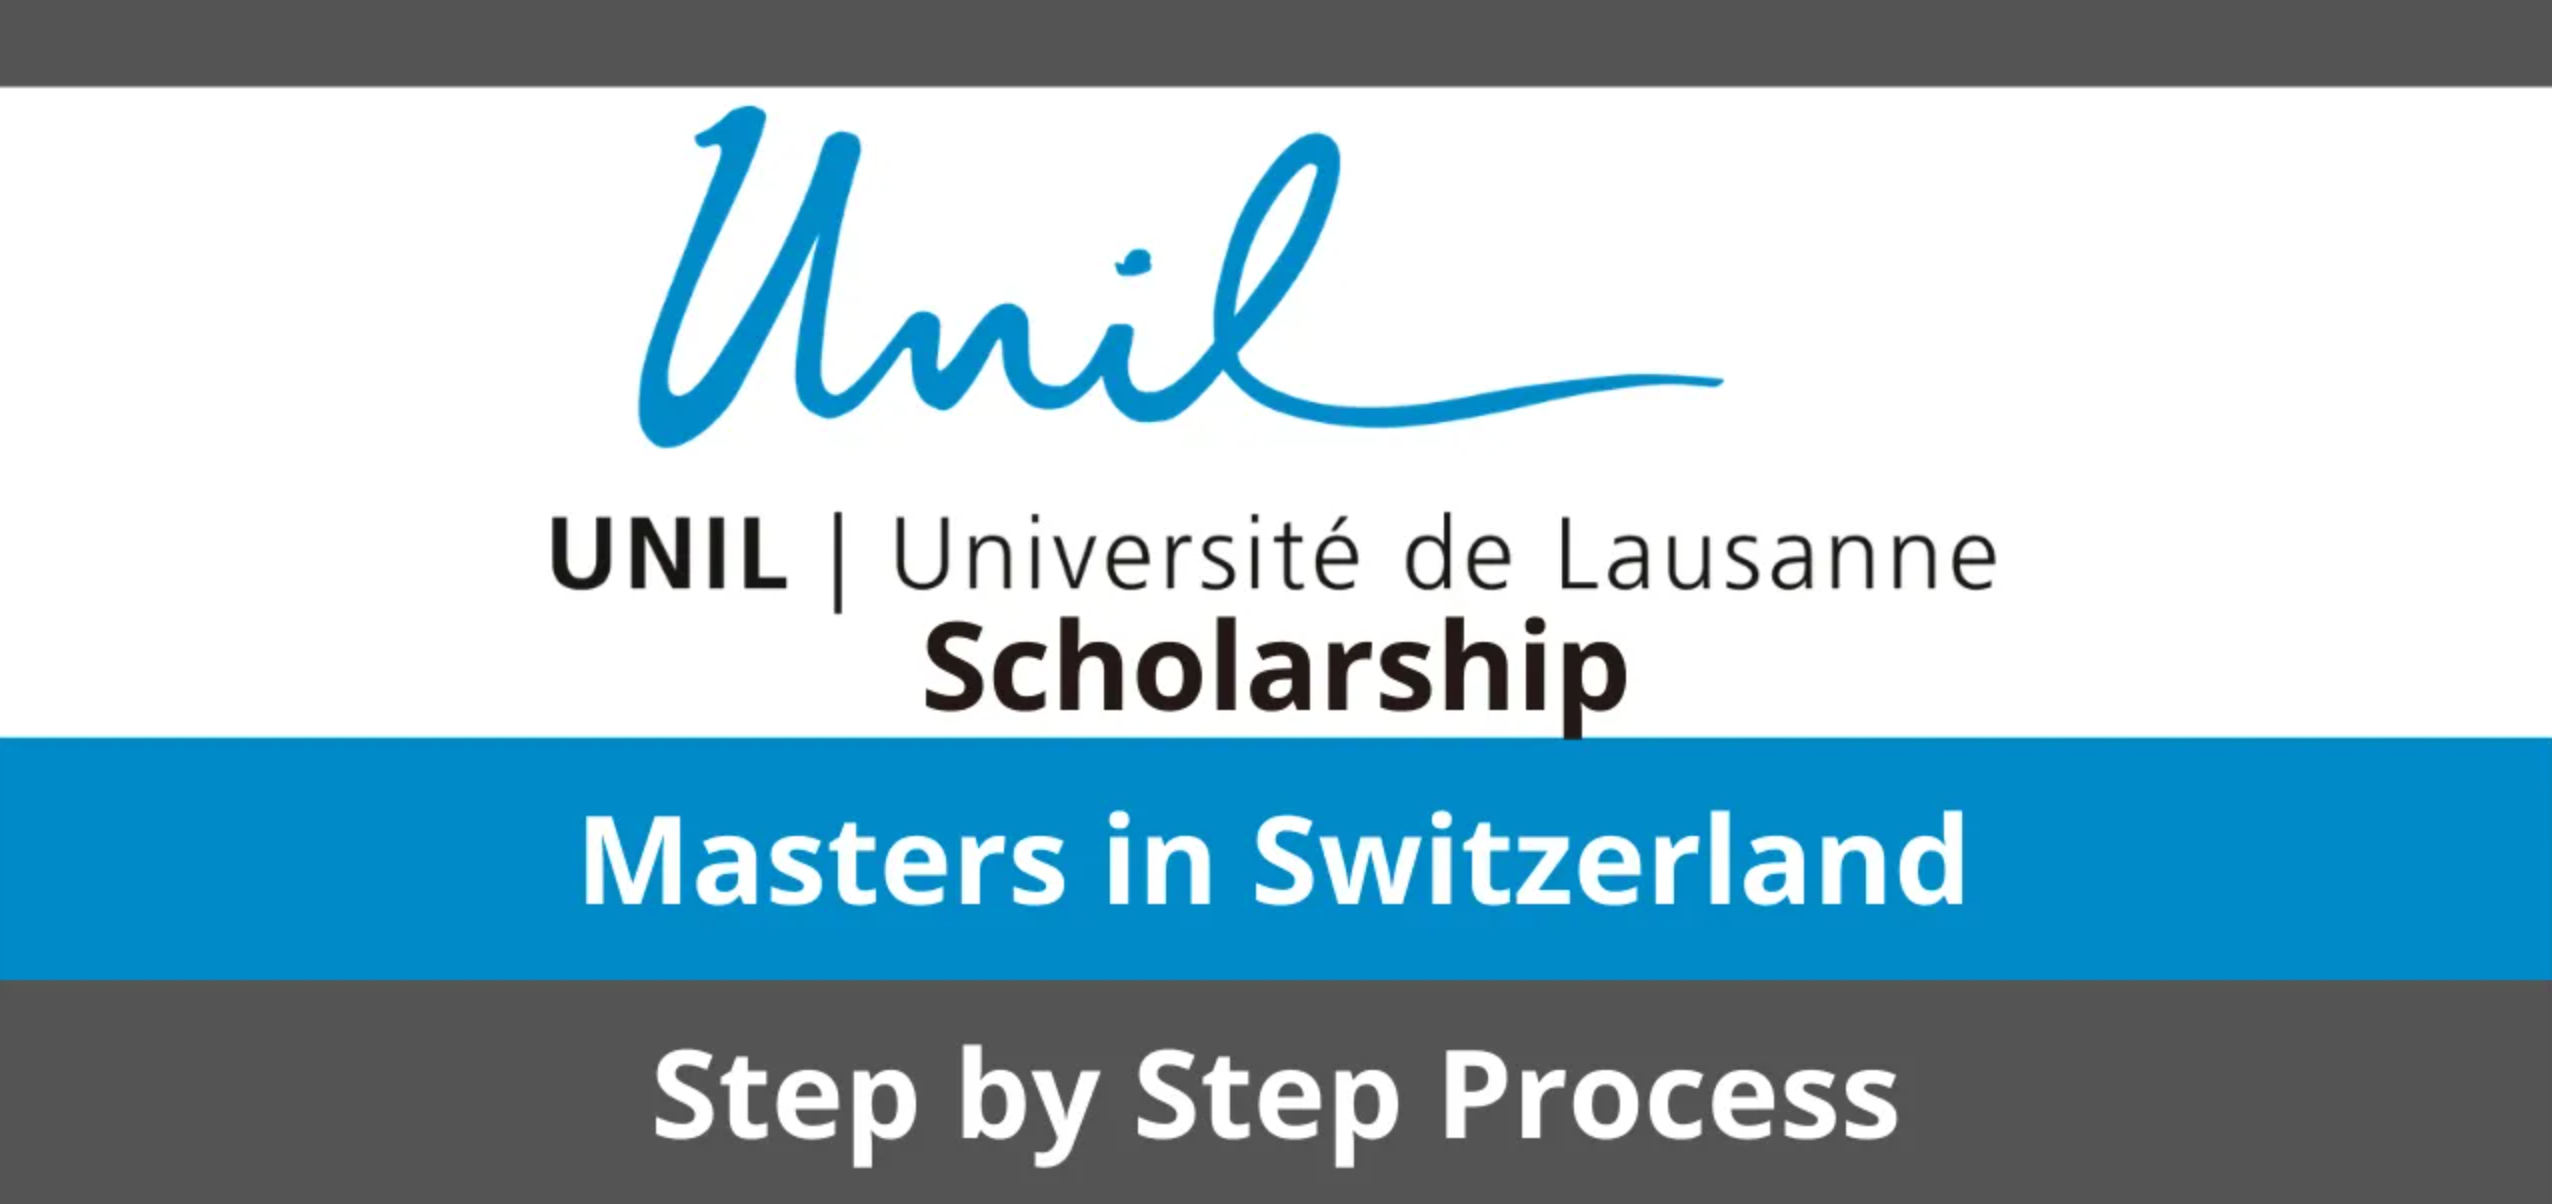 UNIL Grants for Masters | University of Lausanne Scholarship